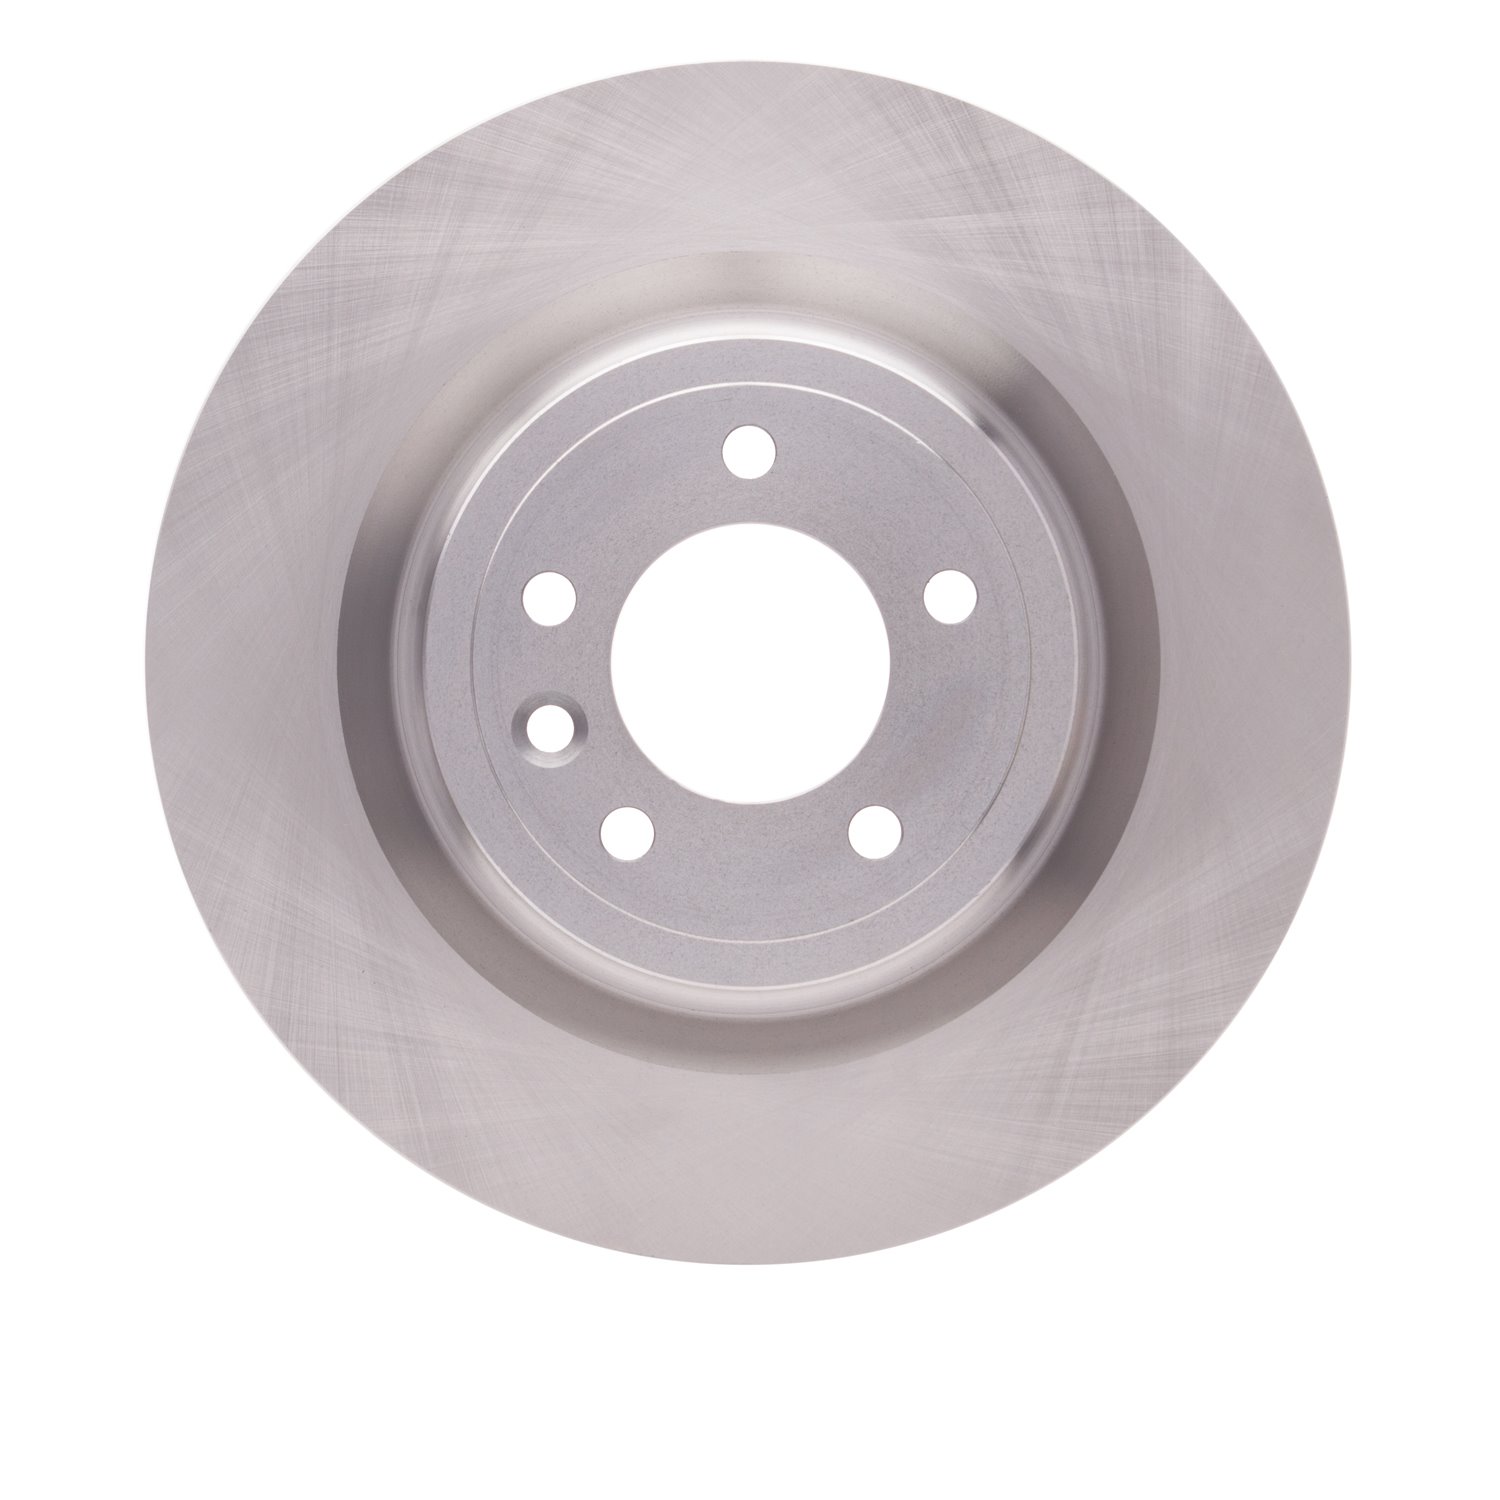 600-11026 Brake Rotor, Fits Select Land Rover, Position: Rear